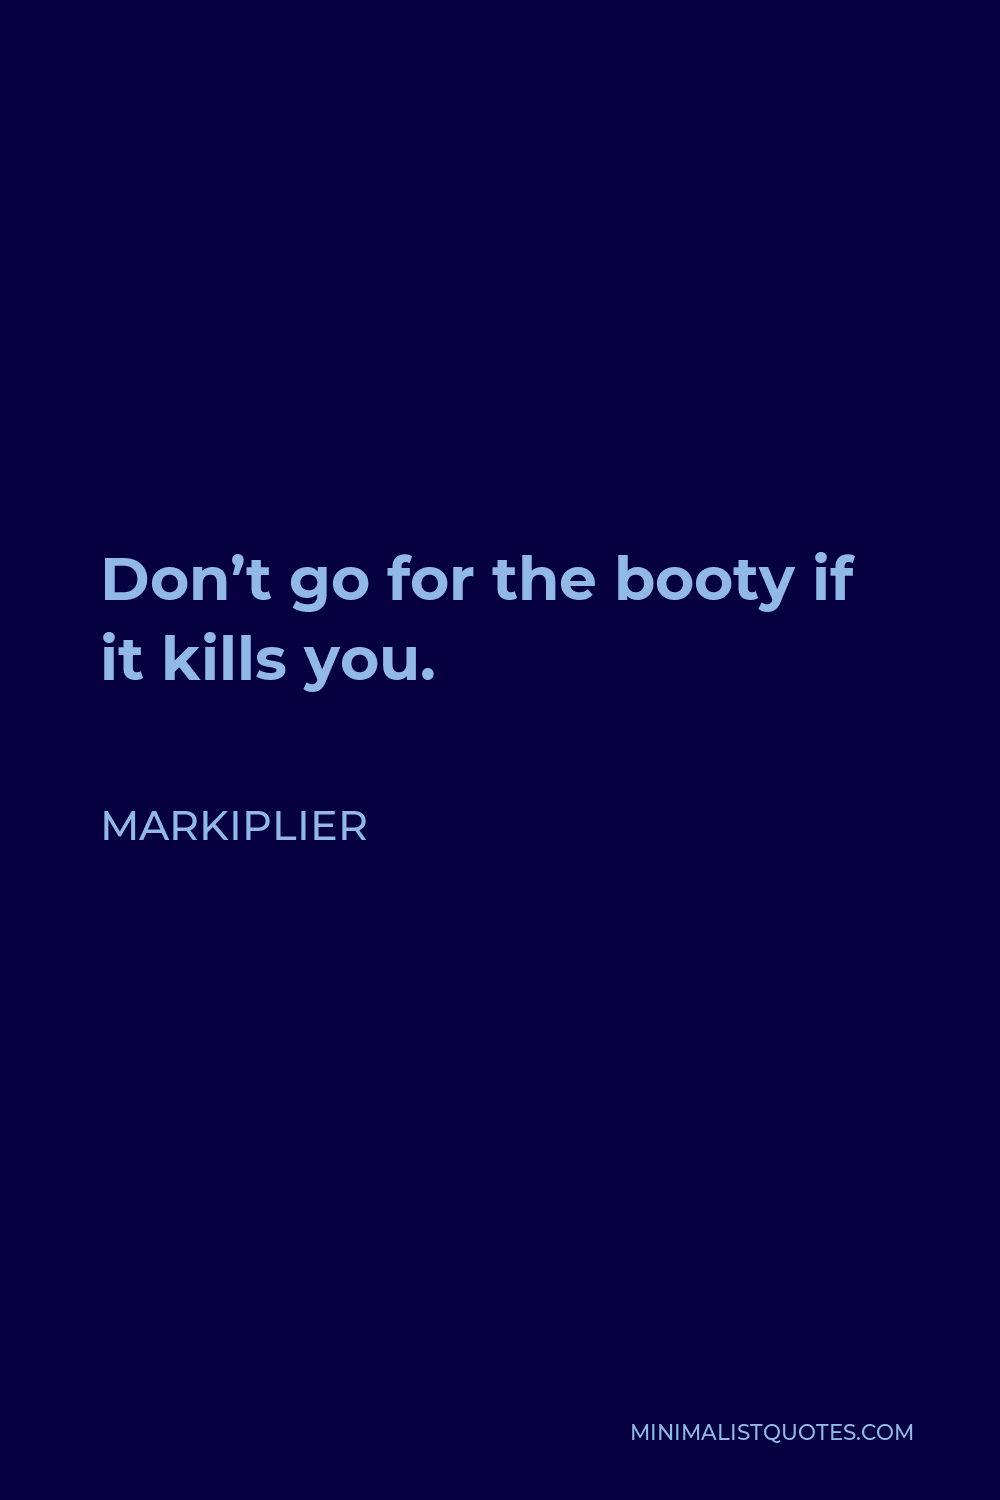 Markiplier Quote - Don’t go for the booty if it kills you.